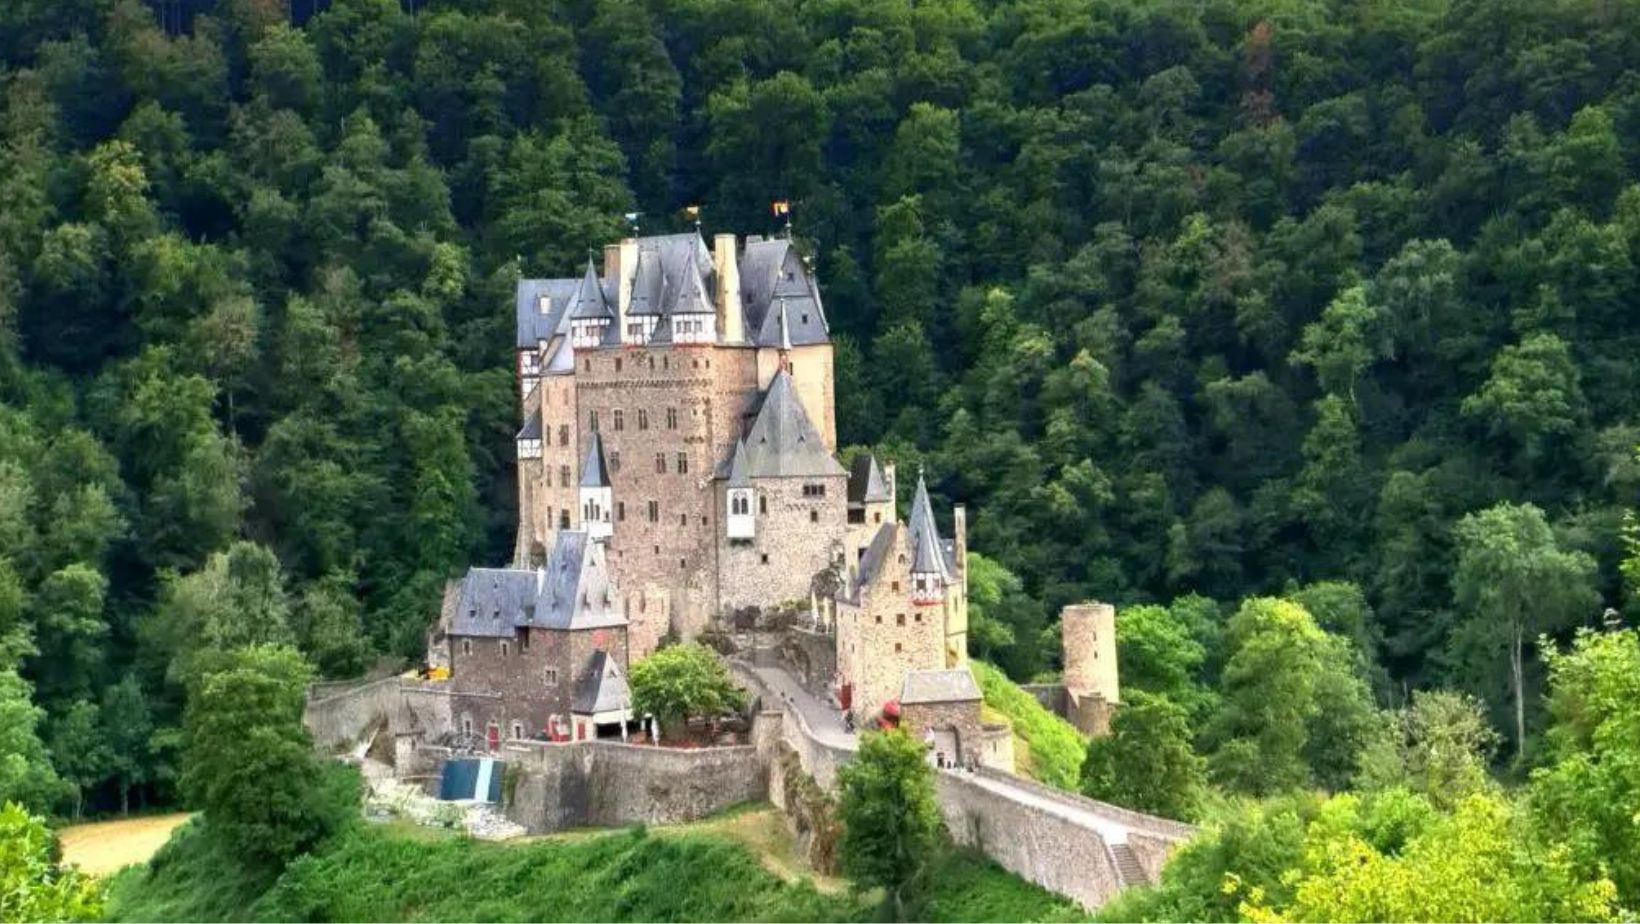 Eltz Castle history and ownership